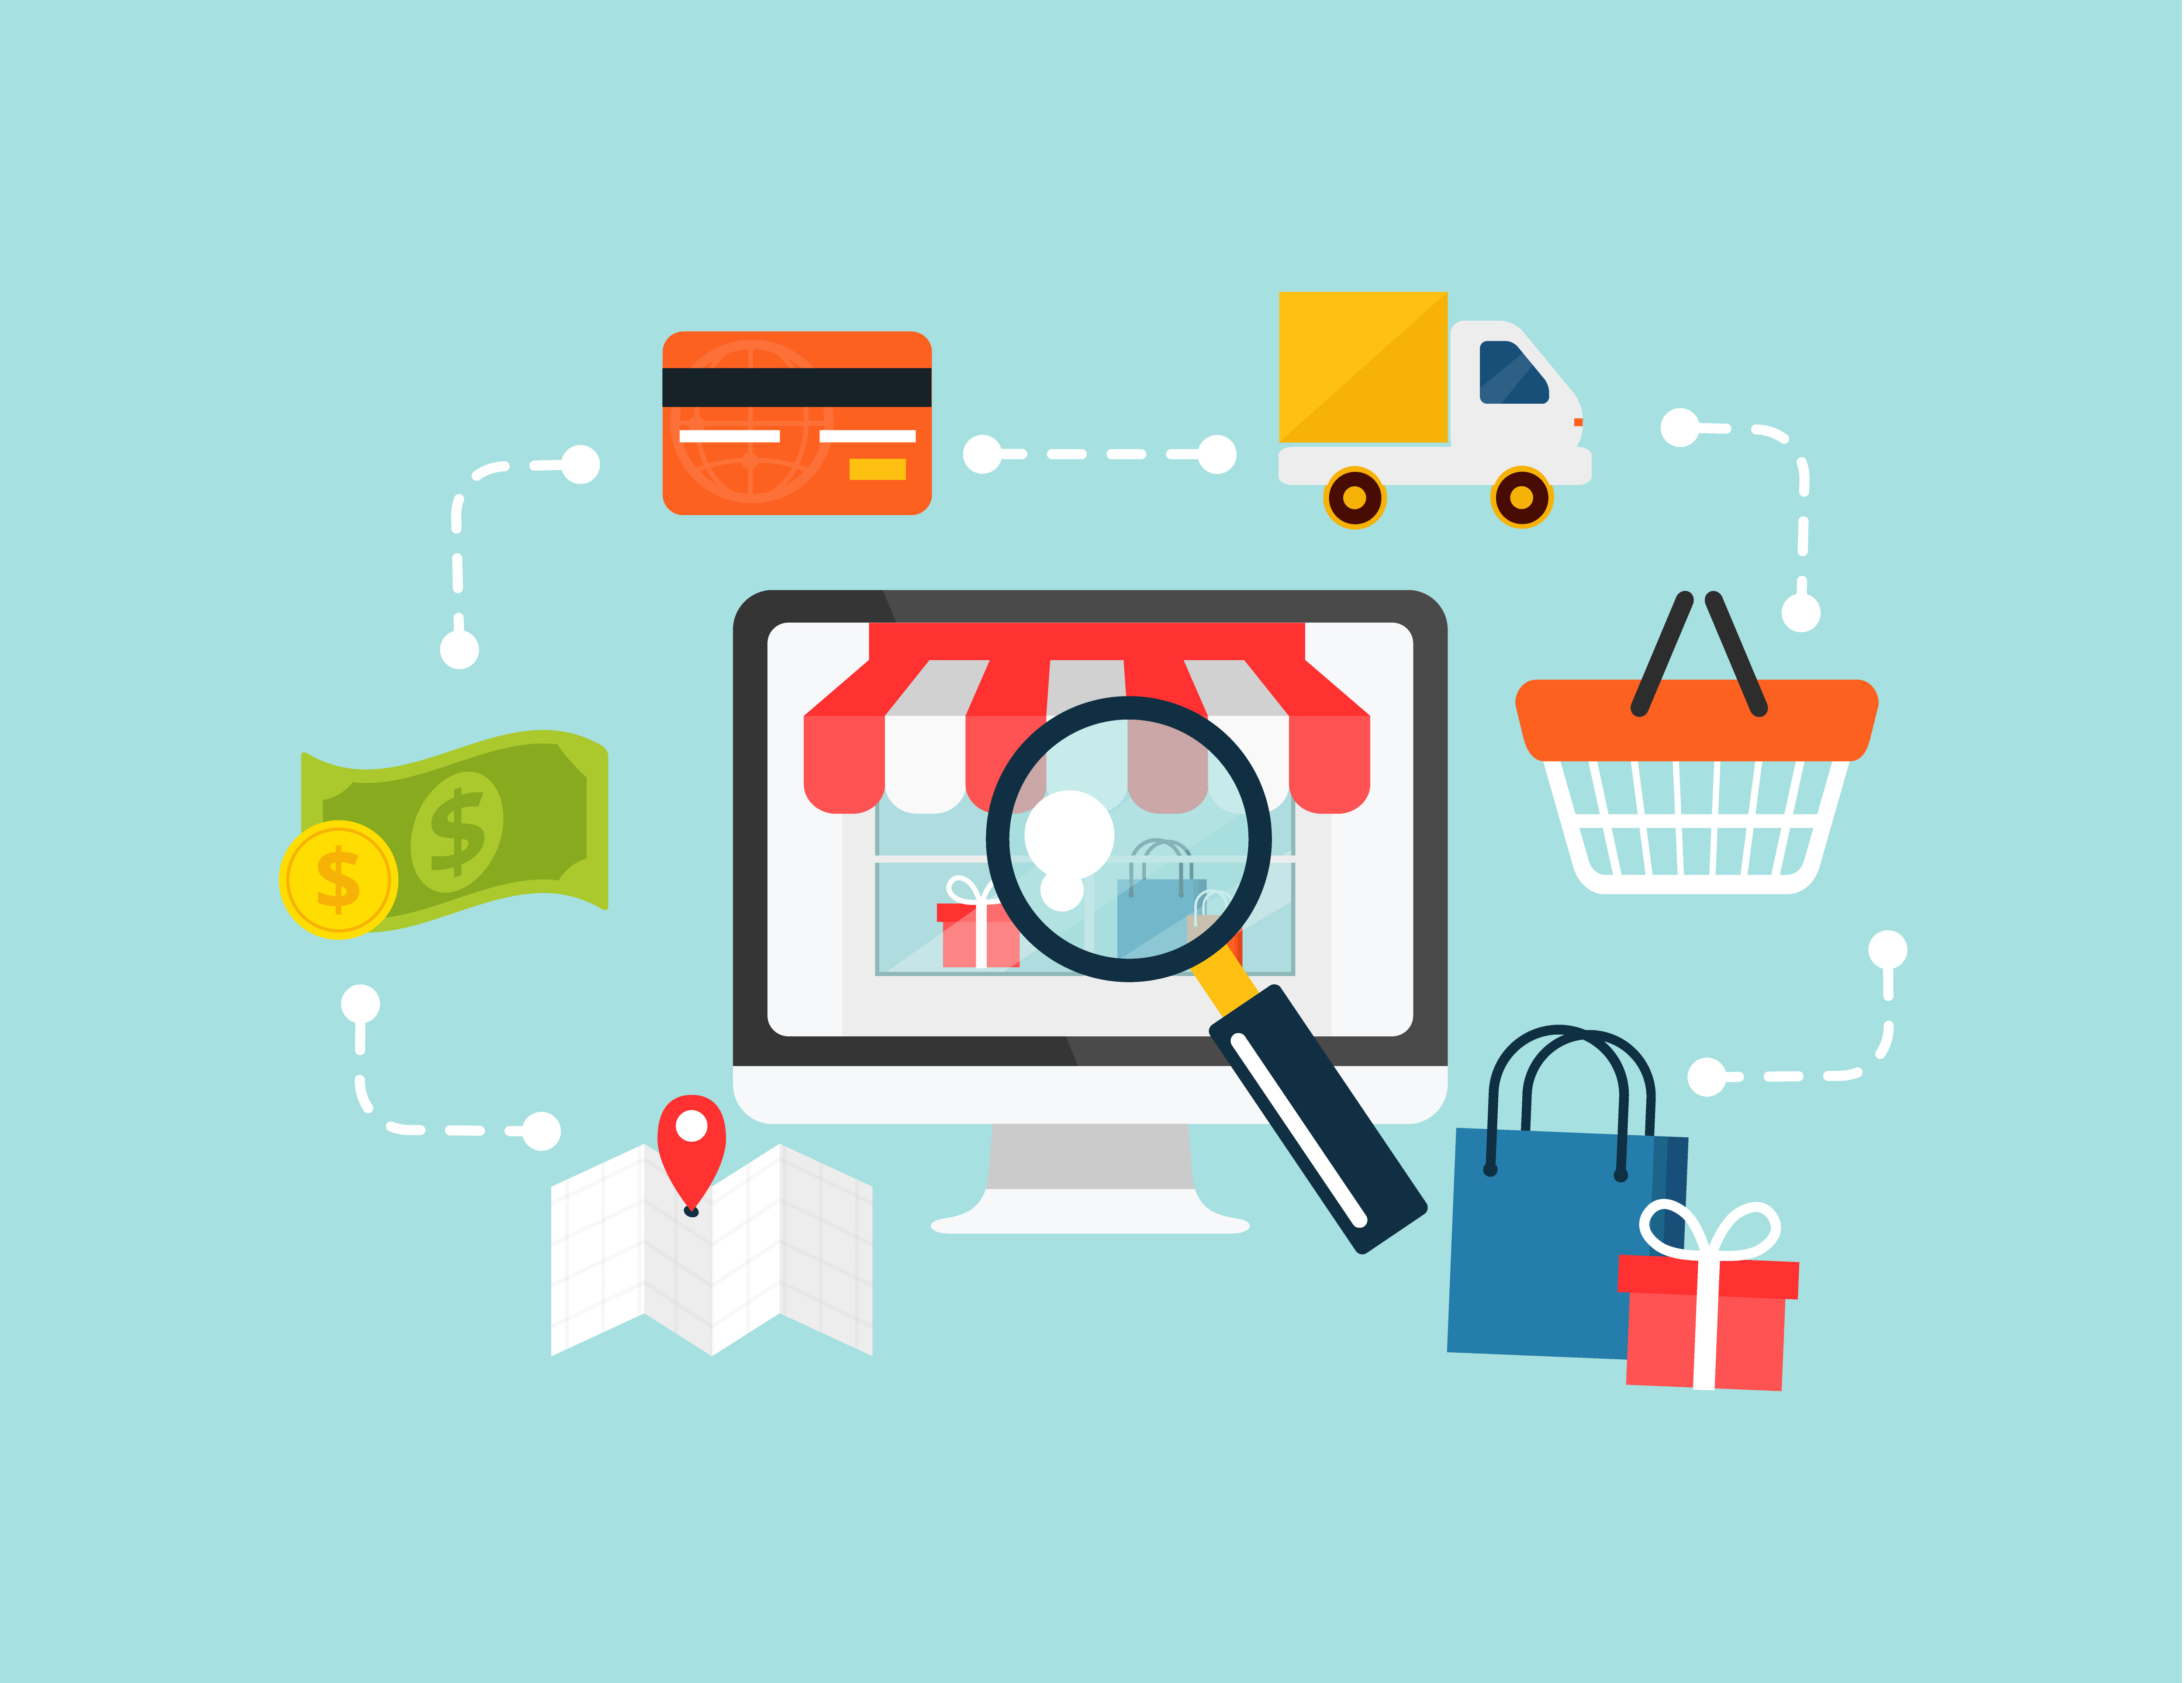 Enhancing Search Options on Your E-commerce Site